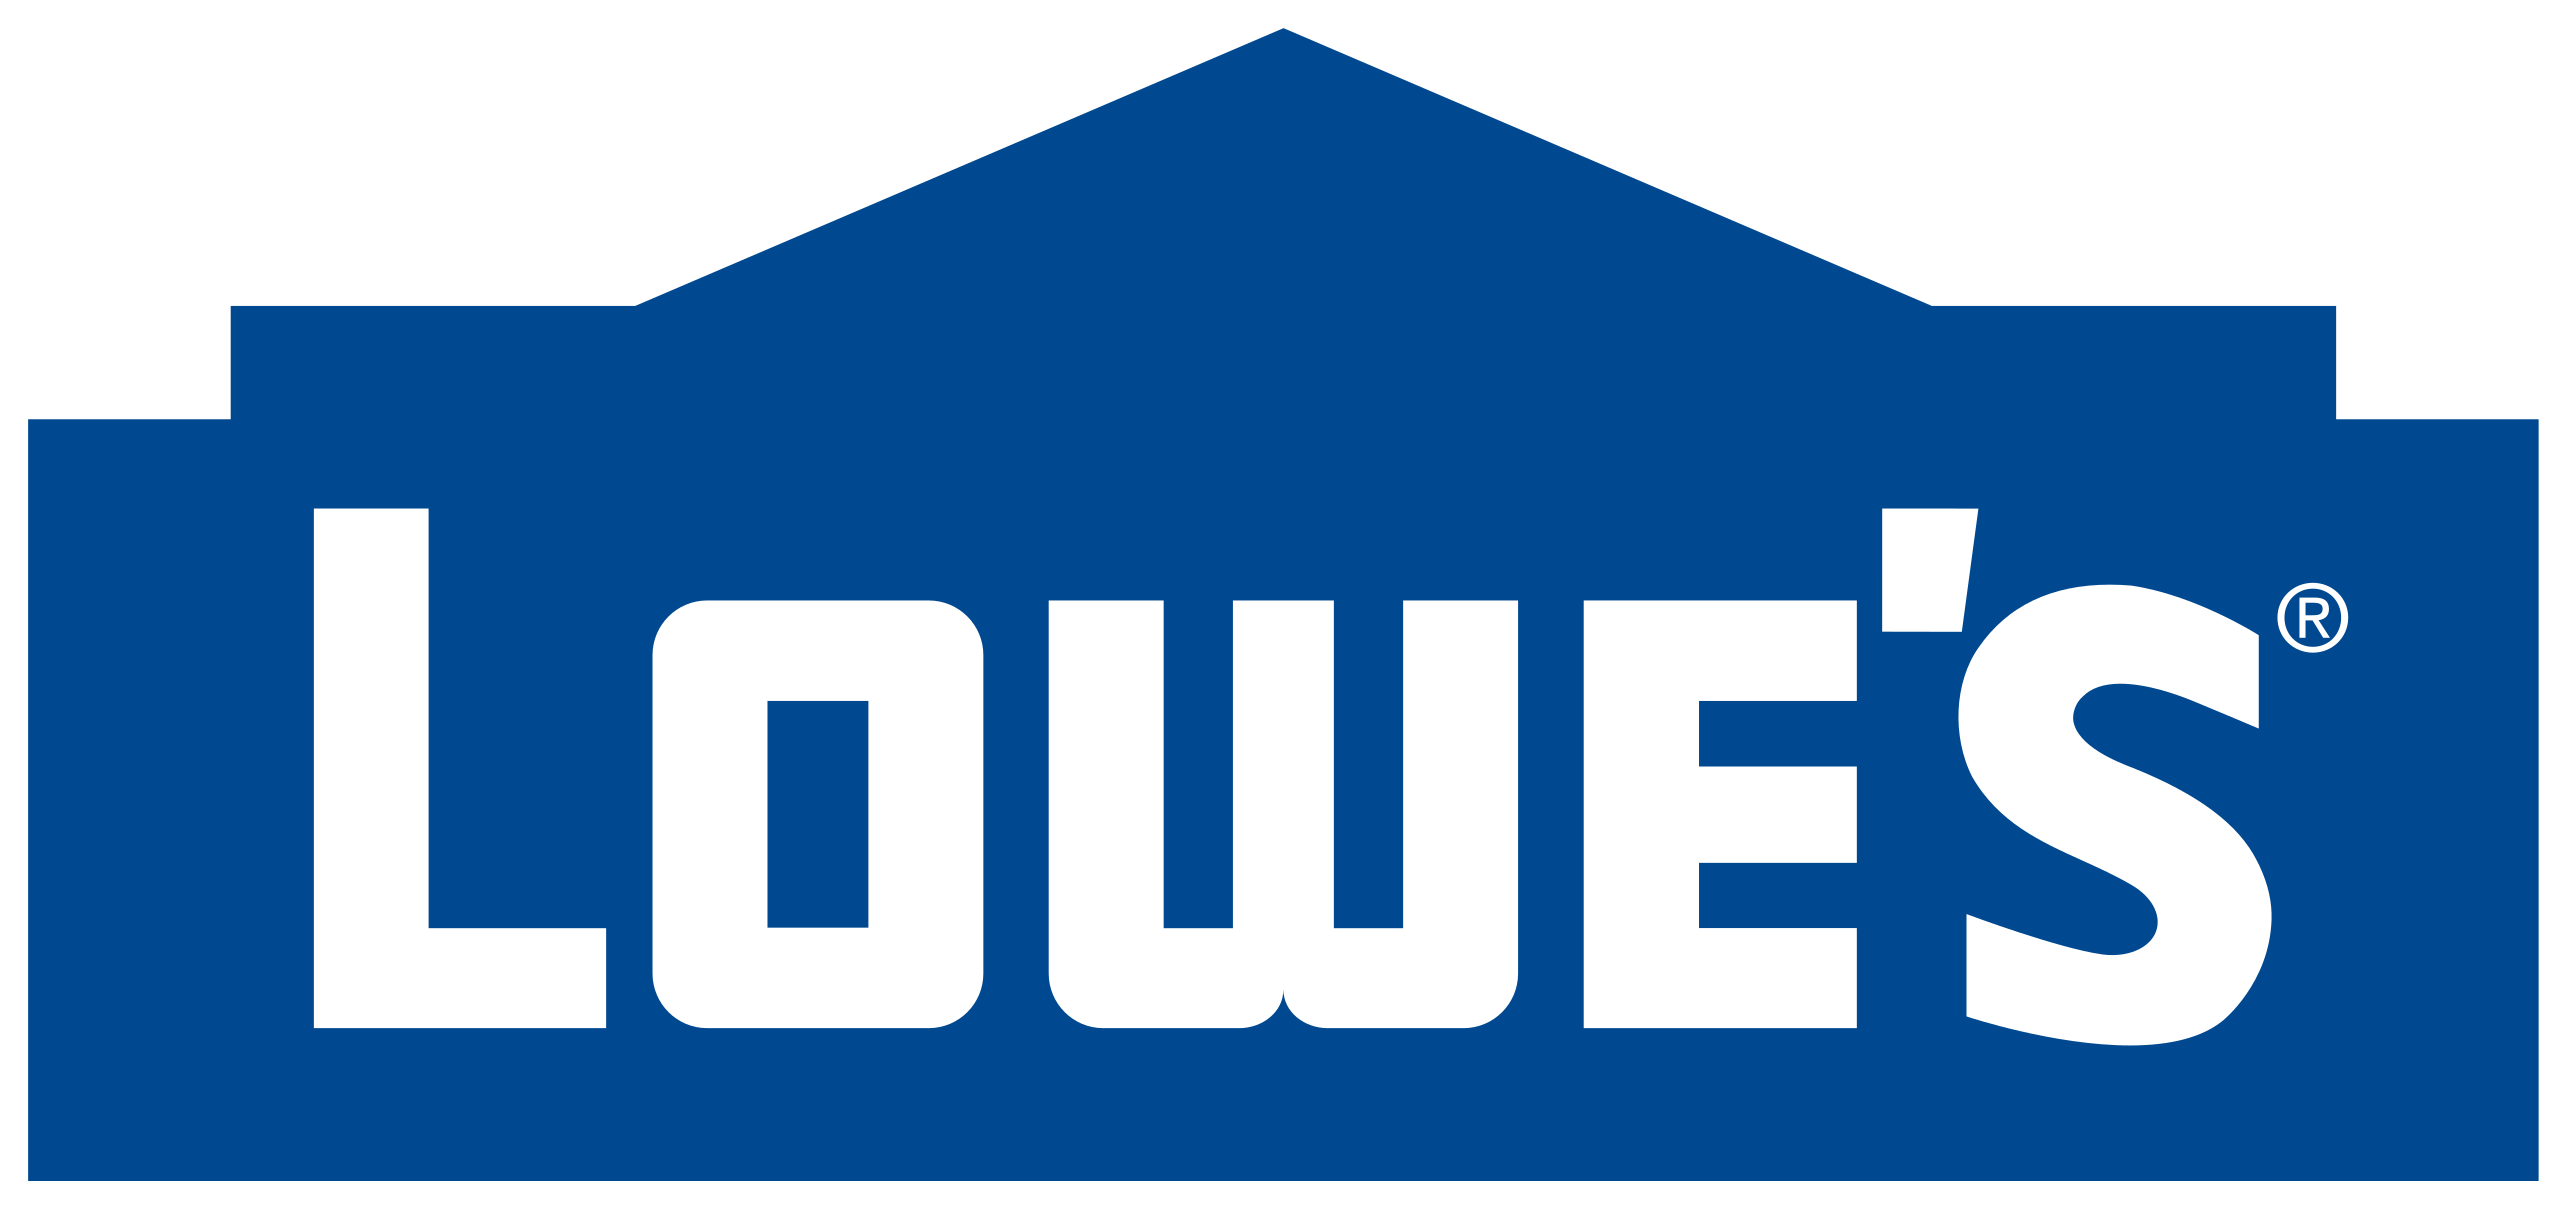 Lowes Logo PNG File